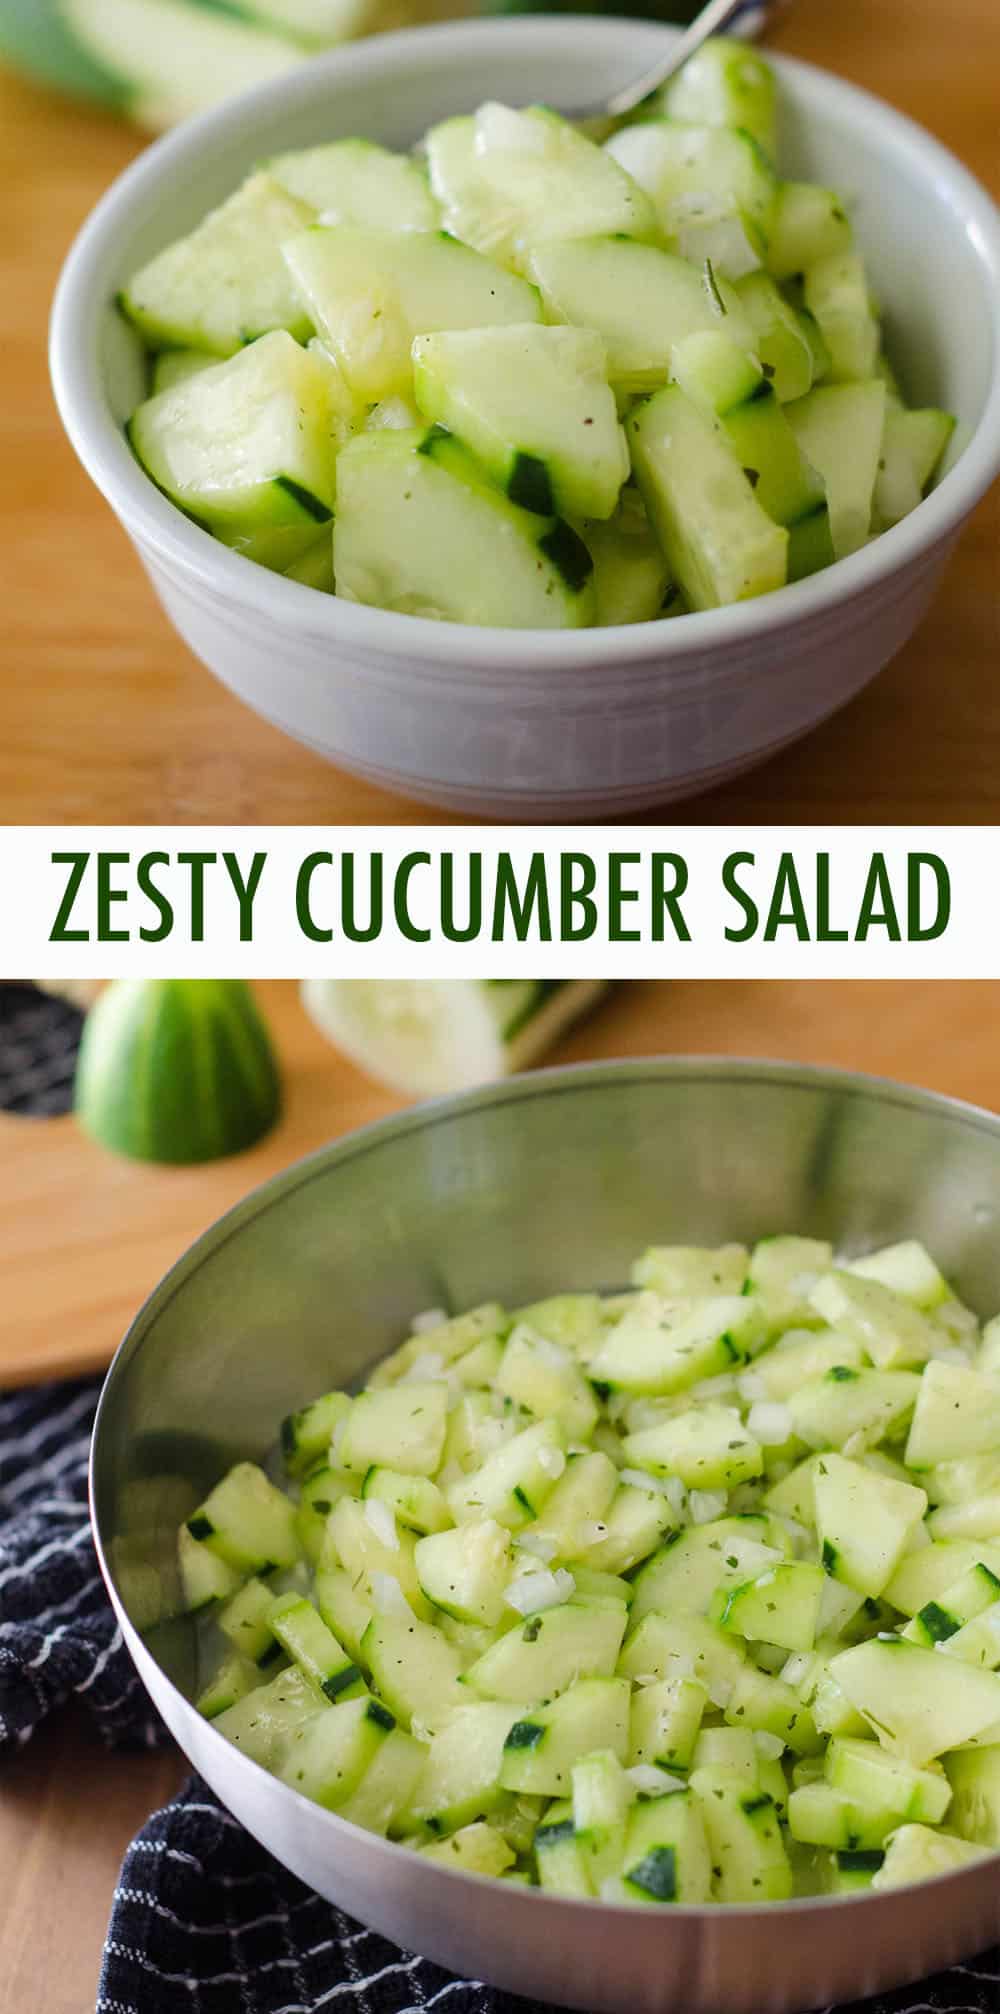 An easy side dish or dip made with crispy cucumbers, sweet onions, peppy ranch flavors, and tangy rice vinegar. Jazz it up with a jalapeño! via @frshaprilflours